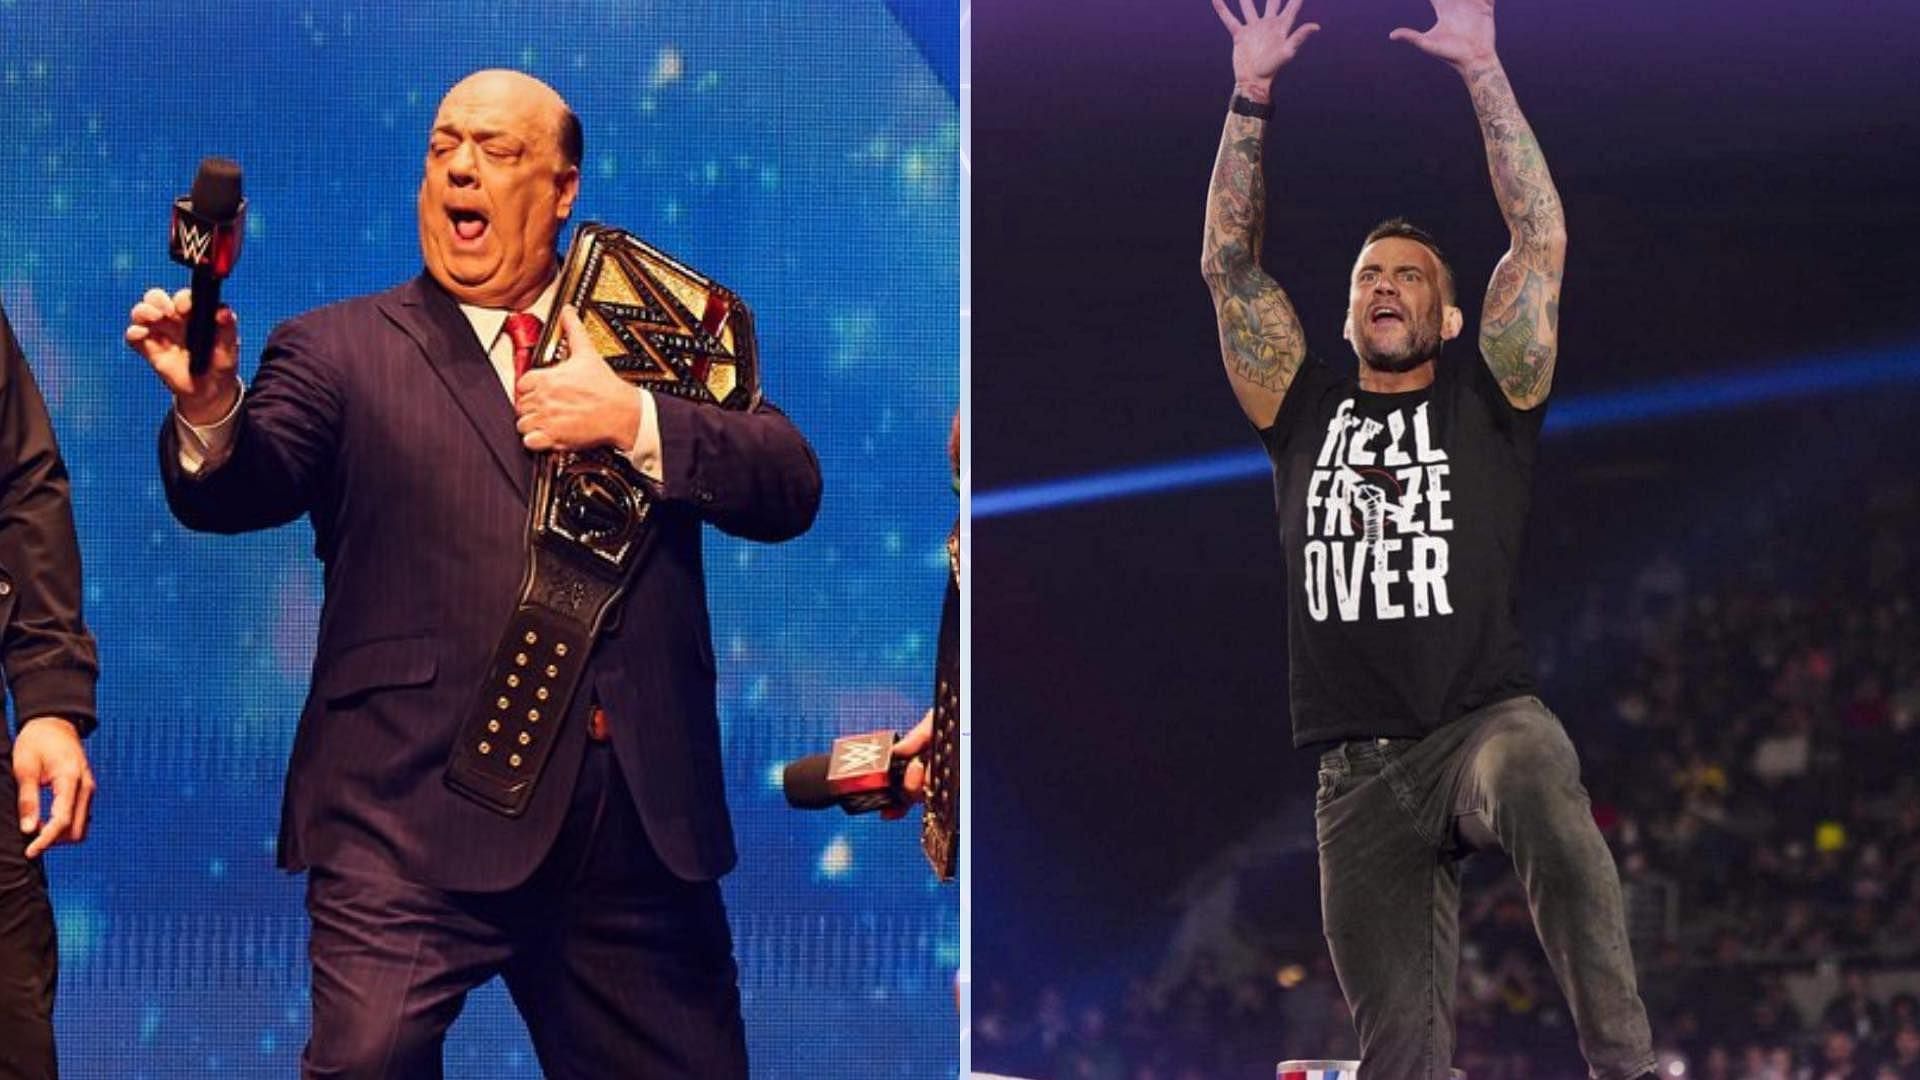 Paul Heyman and CM Punk in picture